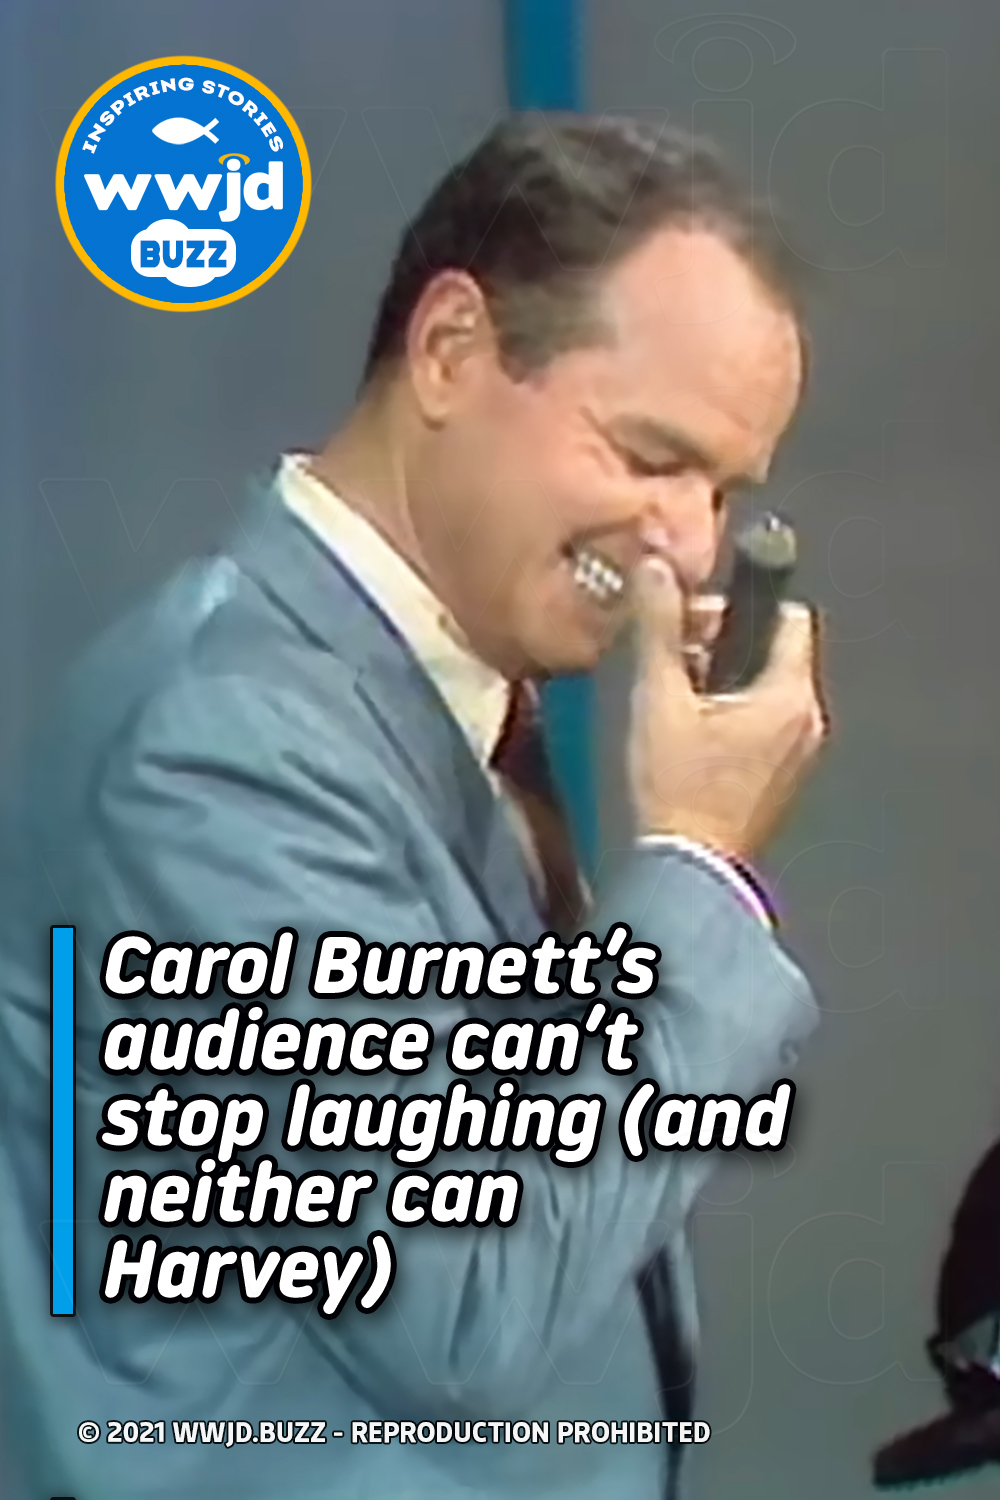 Carol Burnett’s audience can’t stop laughing (and neither can Harvey)